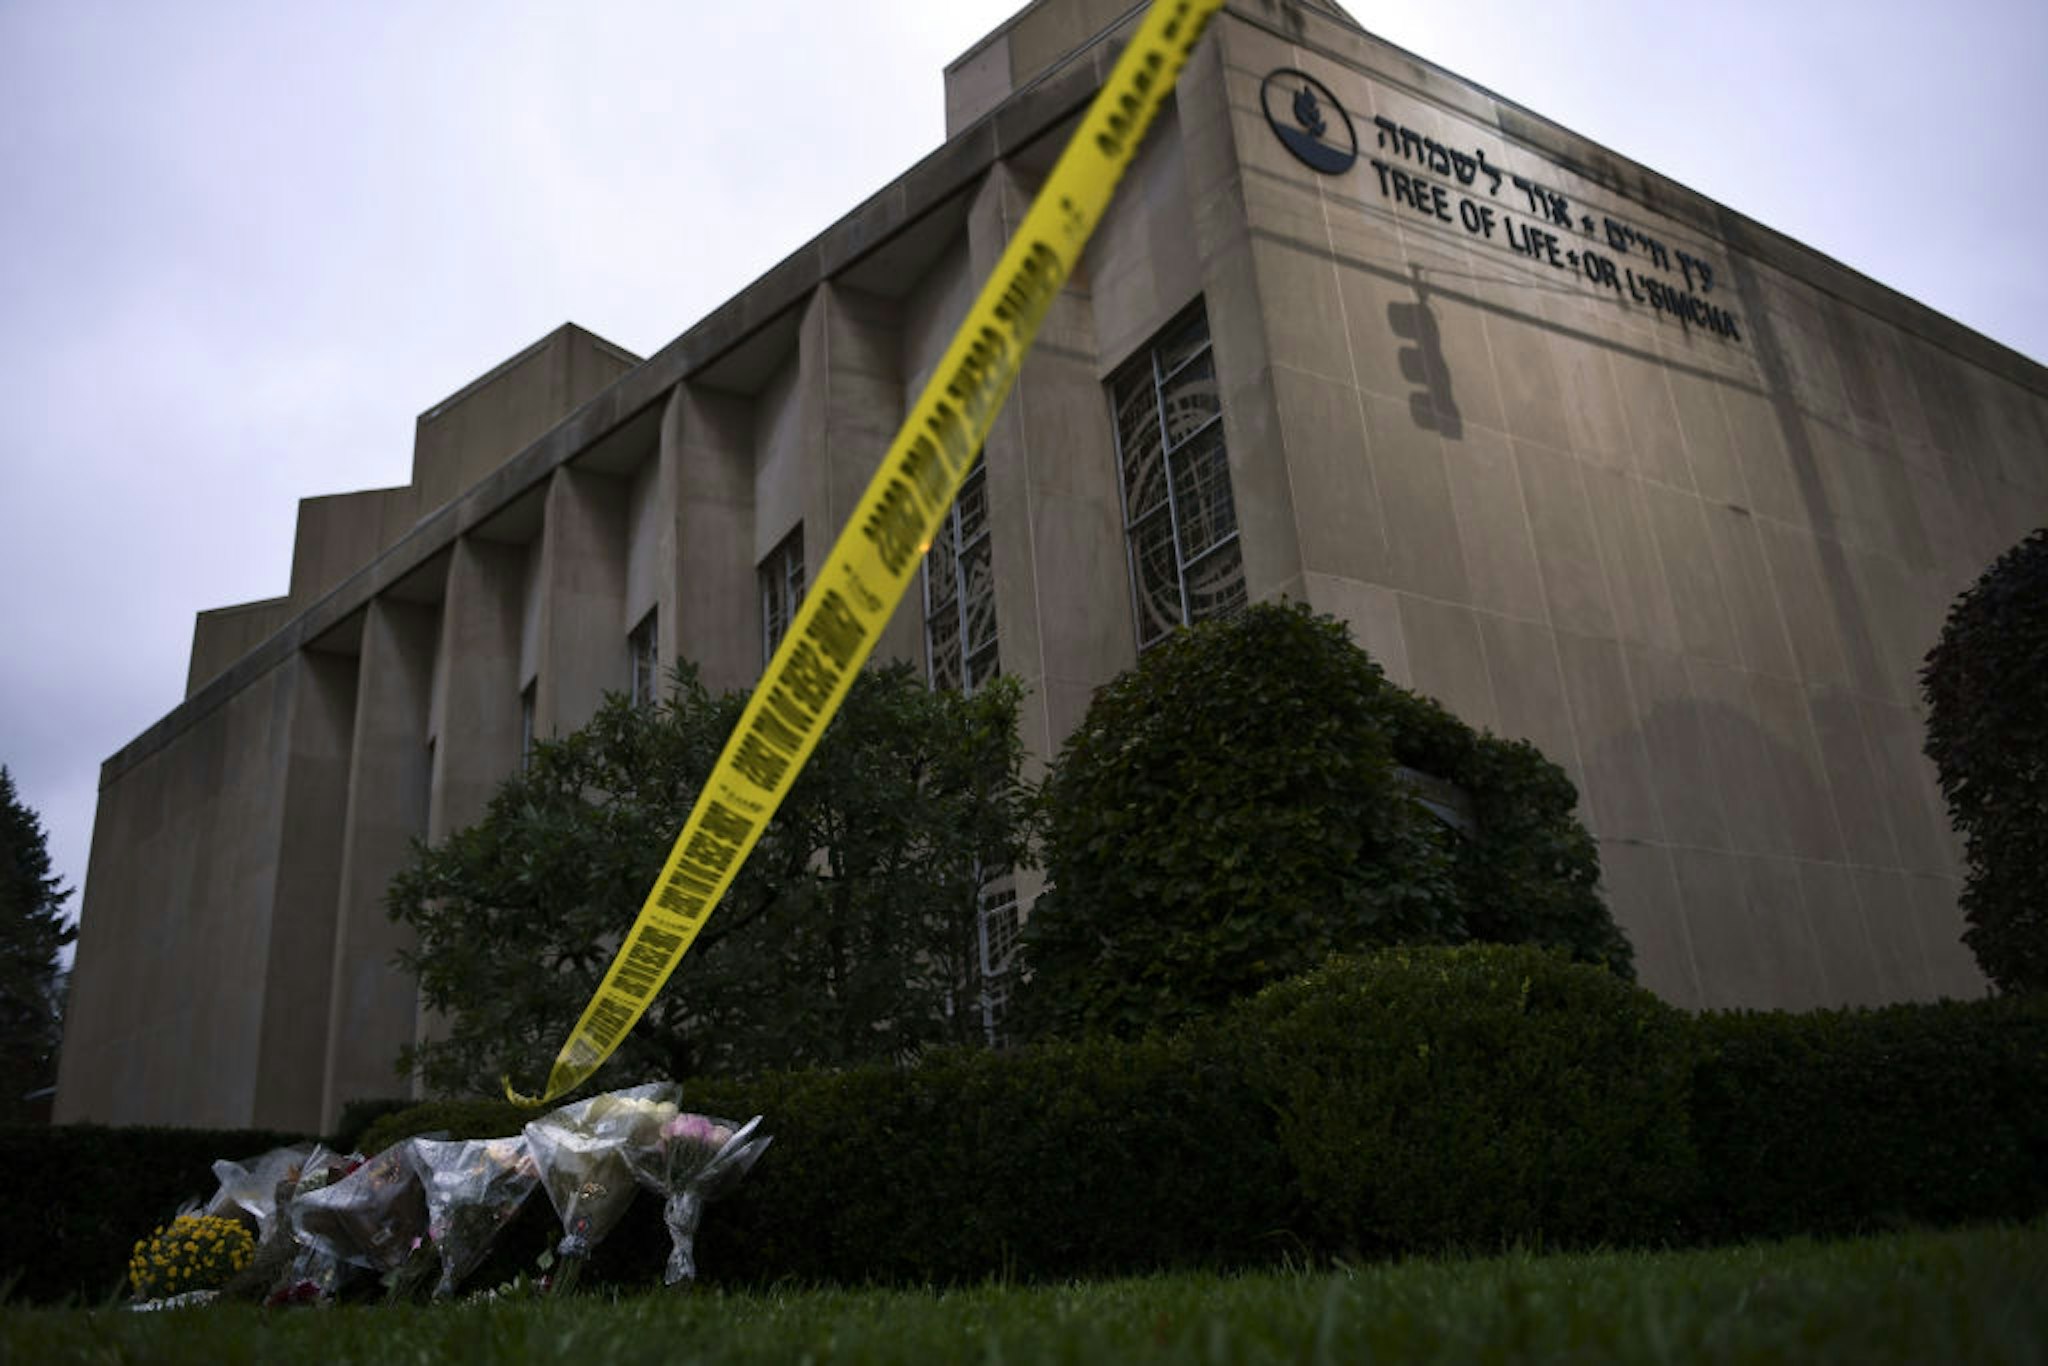 Police tape and memorial flowers are seen on October 28, 2018 outside the Tree of Life Synagogue after a shooting there left 11 people dead in the Squirrel Hill neighborhood of Pittsburgh on October 27, 2018. - A man suspected of bursting into a Pittsburgh synagogue during a baby-naming ceremony and gunning down 11 people has been charged with murder, in the deadliest anti-Semitic attack in recent US history. The suspect -- identified as a 46-year-old Robert Bowers -- reportedly yelled "All Jews must die" as he sprayed bullets into the Tree of Life synagogue during Sabbath services on Saturday before exchanging fire with police, in an attack that also wounded six people. (Photo by Brendan Smialowski / AFP)